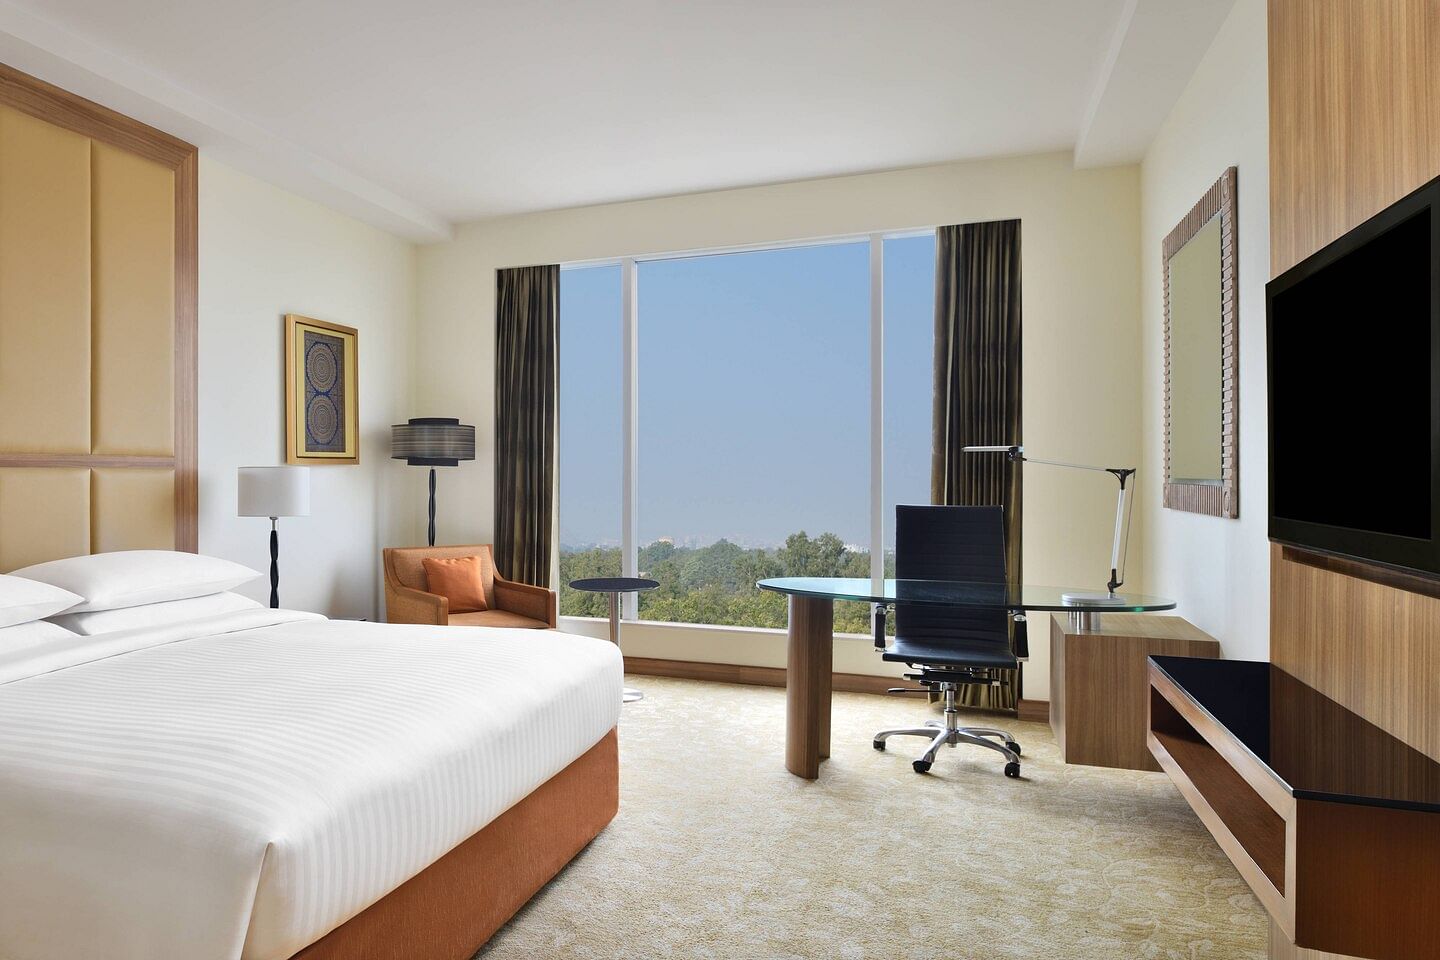 Marriott Whitefield in Whitefield, Bangalore